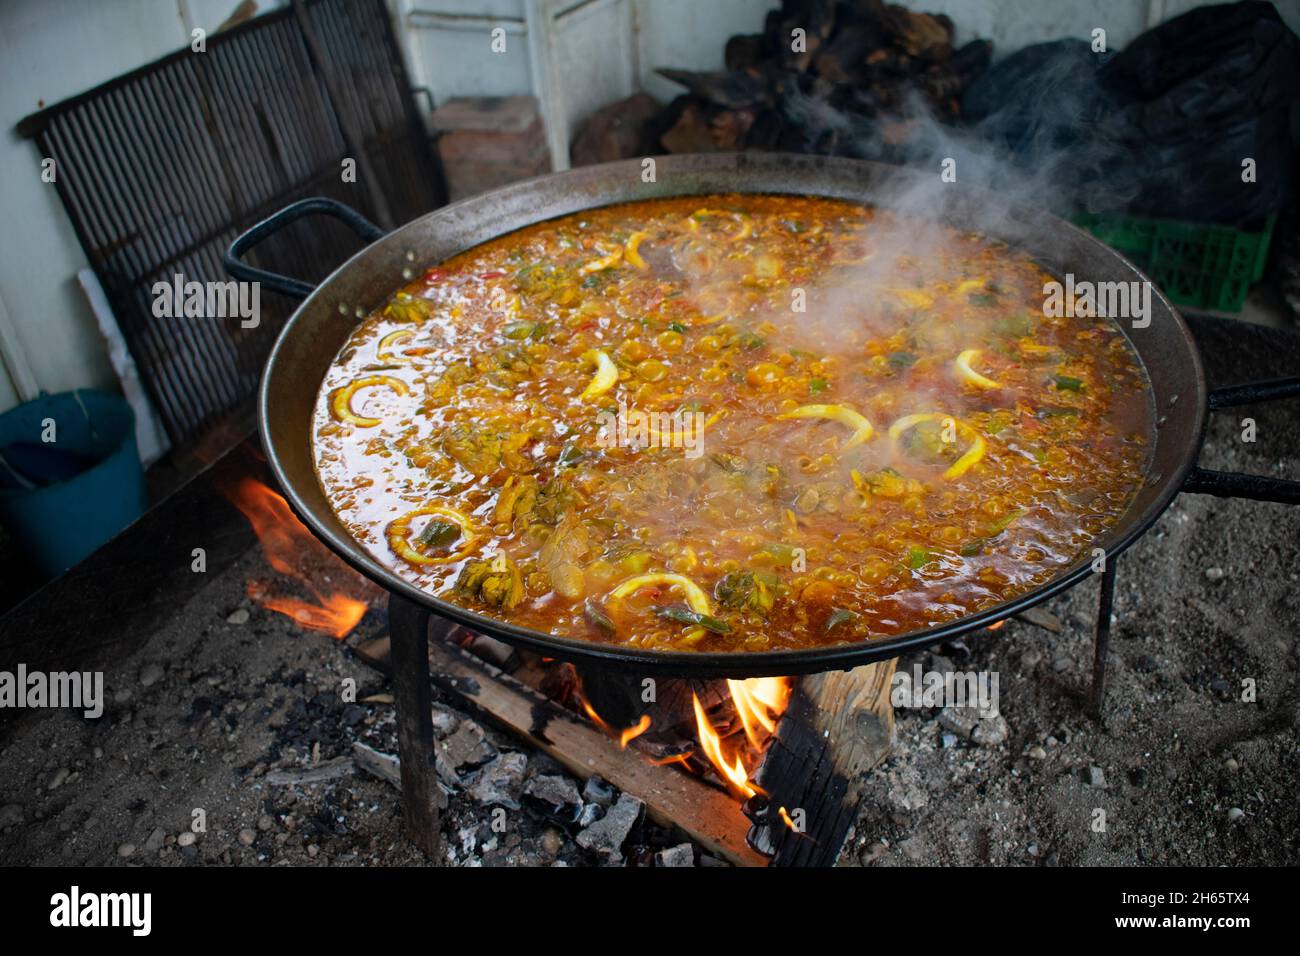 Tasty Spanish paella cooking over a wood fire at a Nerja beach restaurant Typical Spanish cuisine cooked in the old fashioned way  Landscape aspect sh Stock Photo